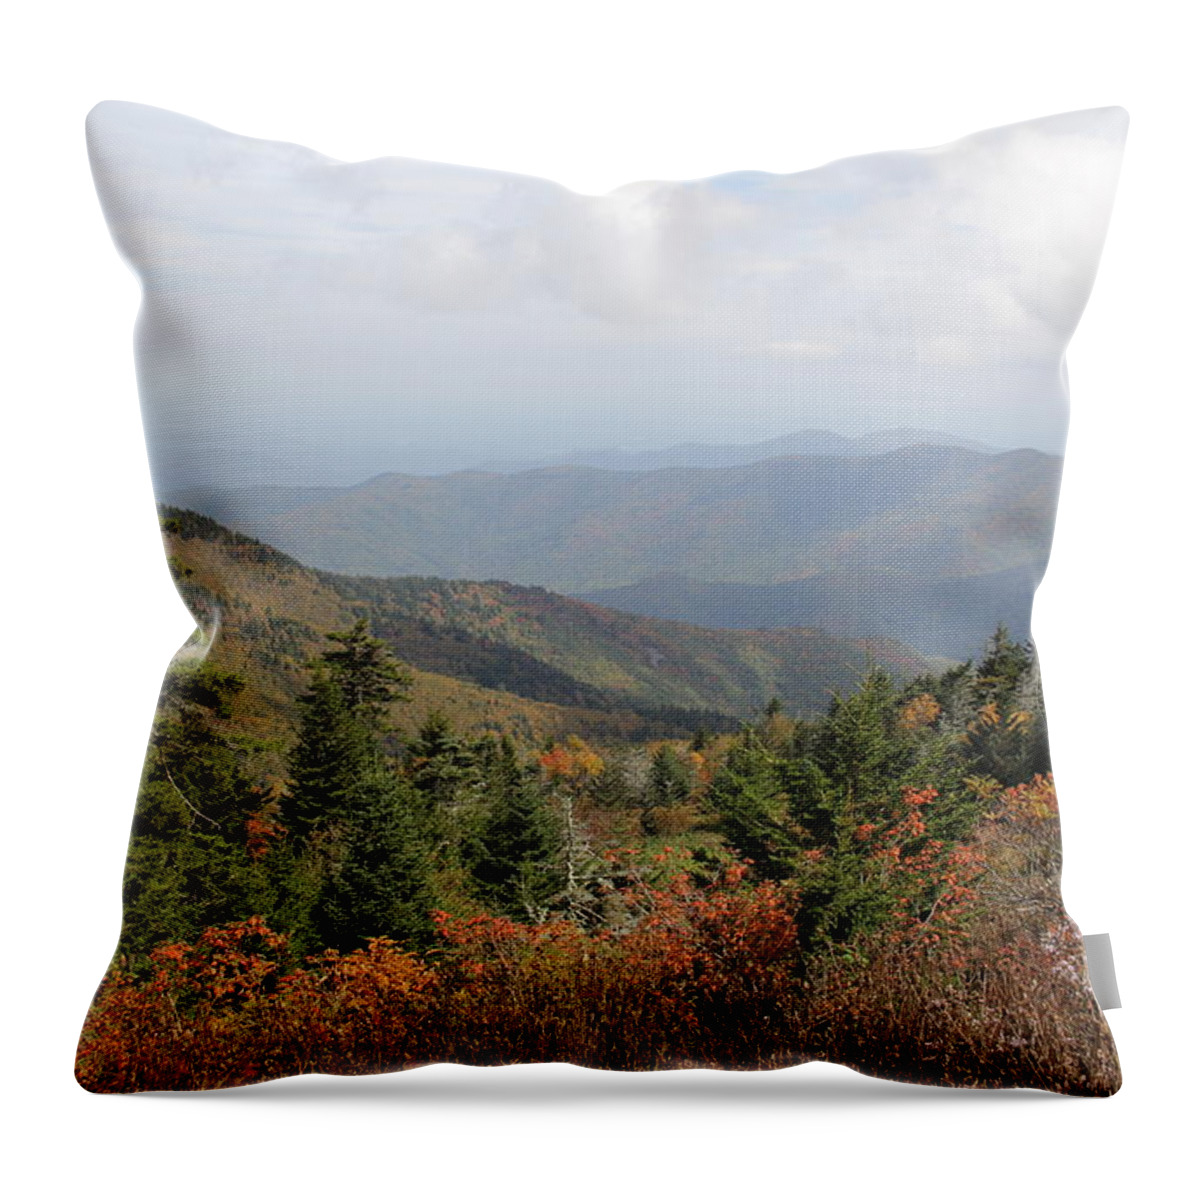 Long Range Views Throw Pillow featuring the photograph Mountain Long View by Allen Nice-Webb